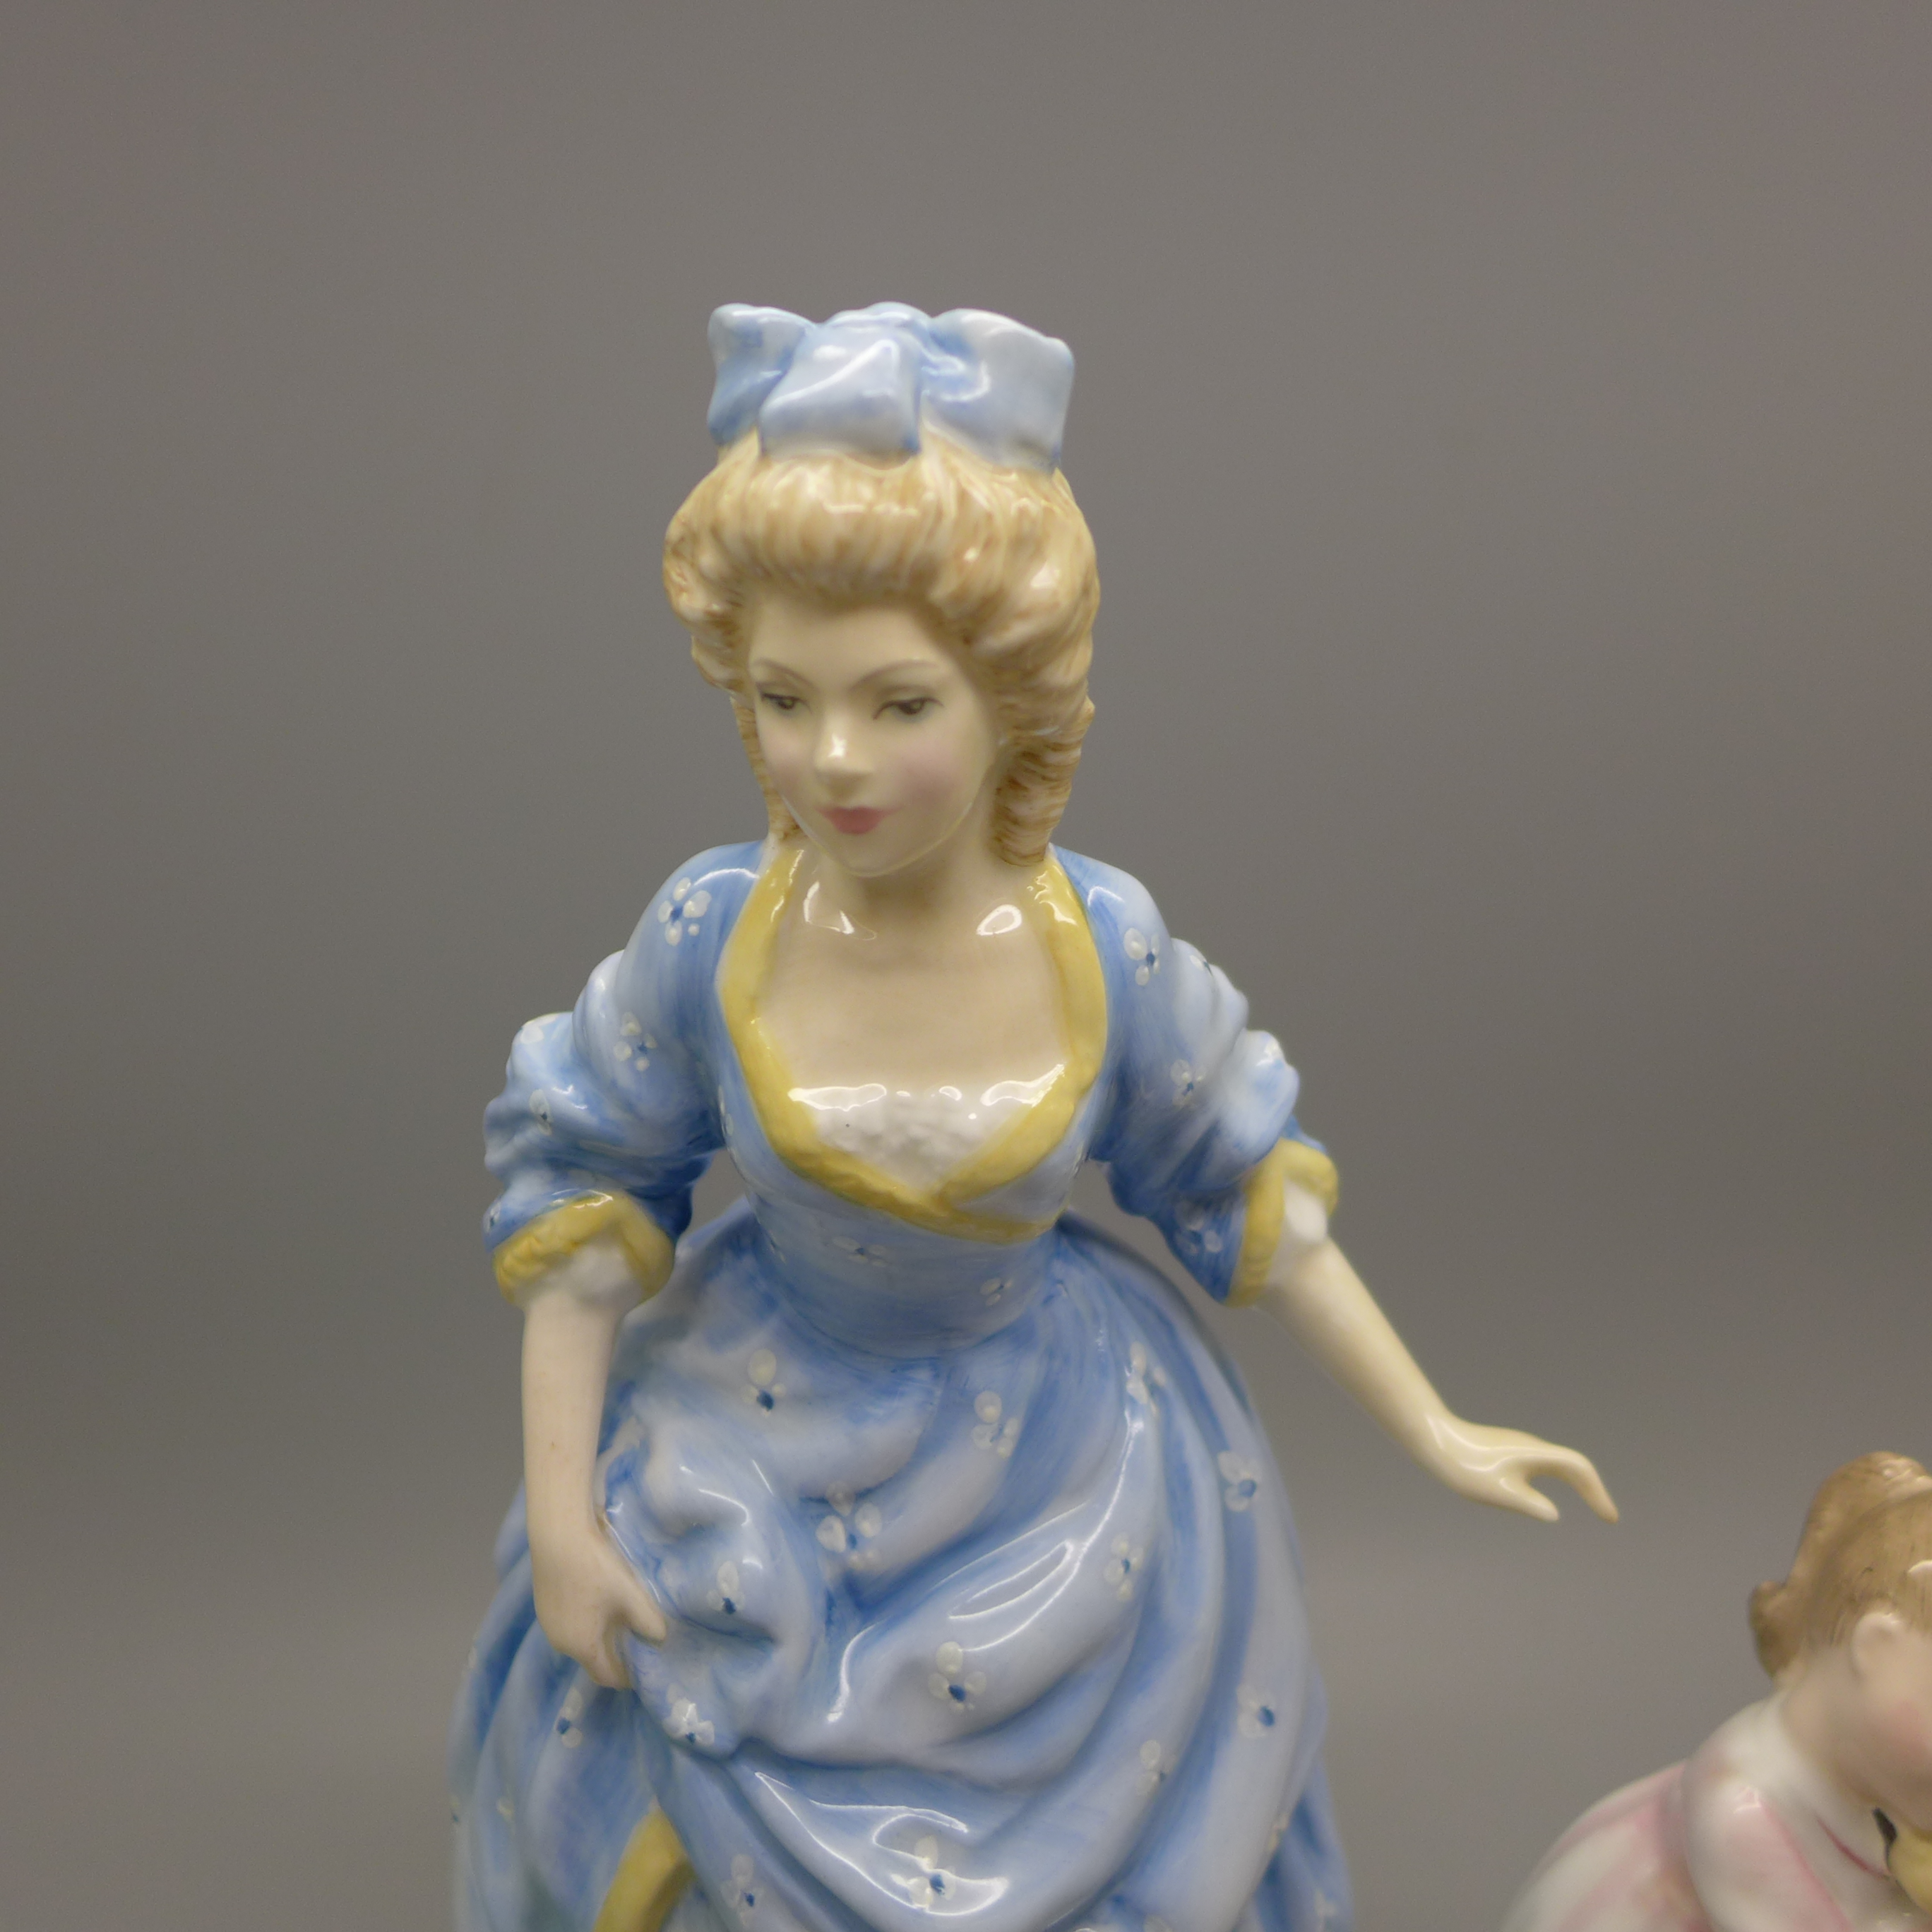 Two Royal Doulton figures, a Coalport figure and a Royal Crown Derby Teddy bear paperweight - Image 2 of 5